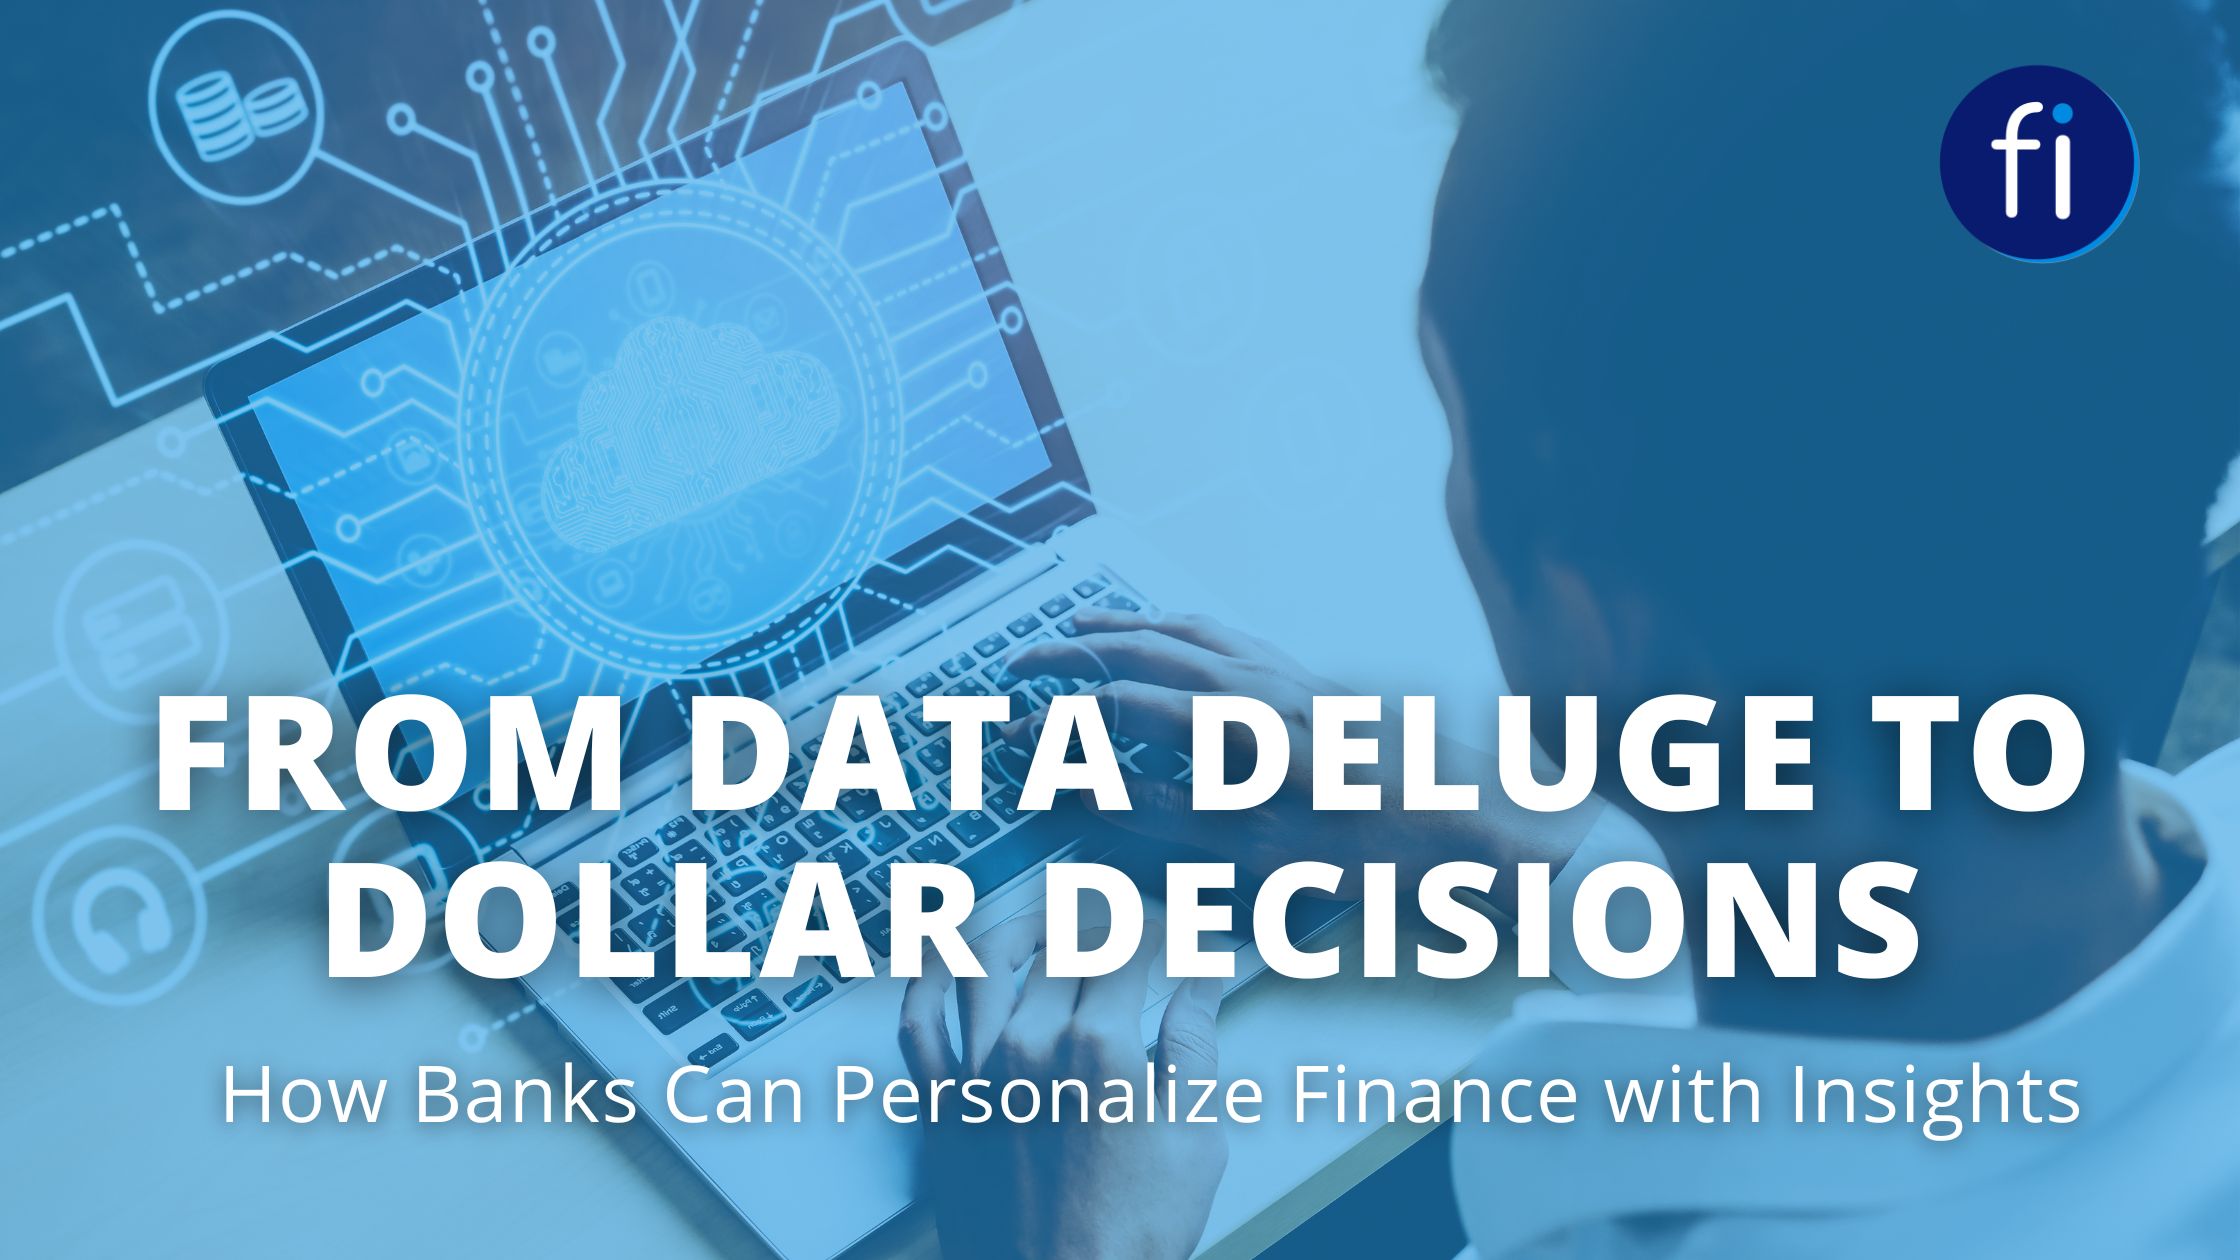 From Data Deluge to Dollar Decisions: How Banks Can Personalize Finance with Insights